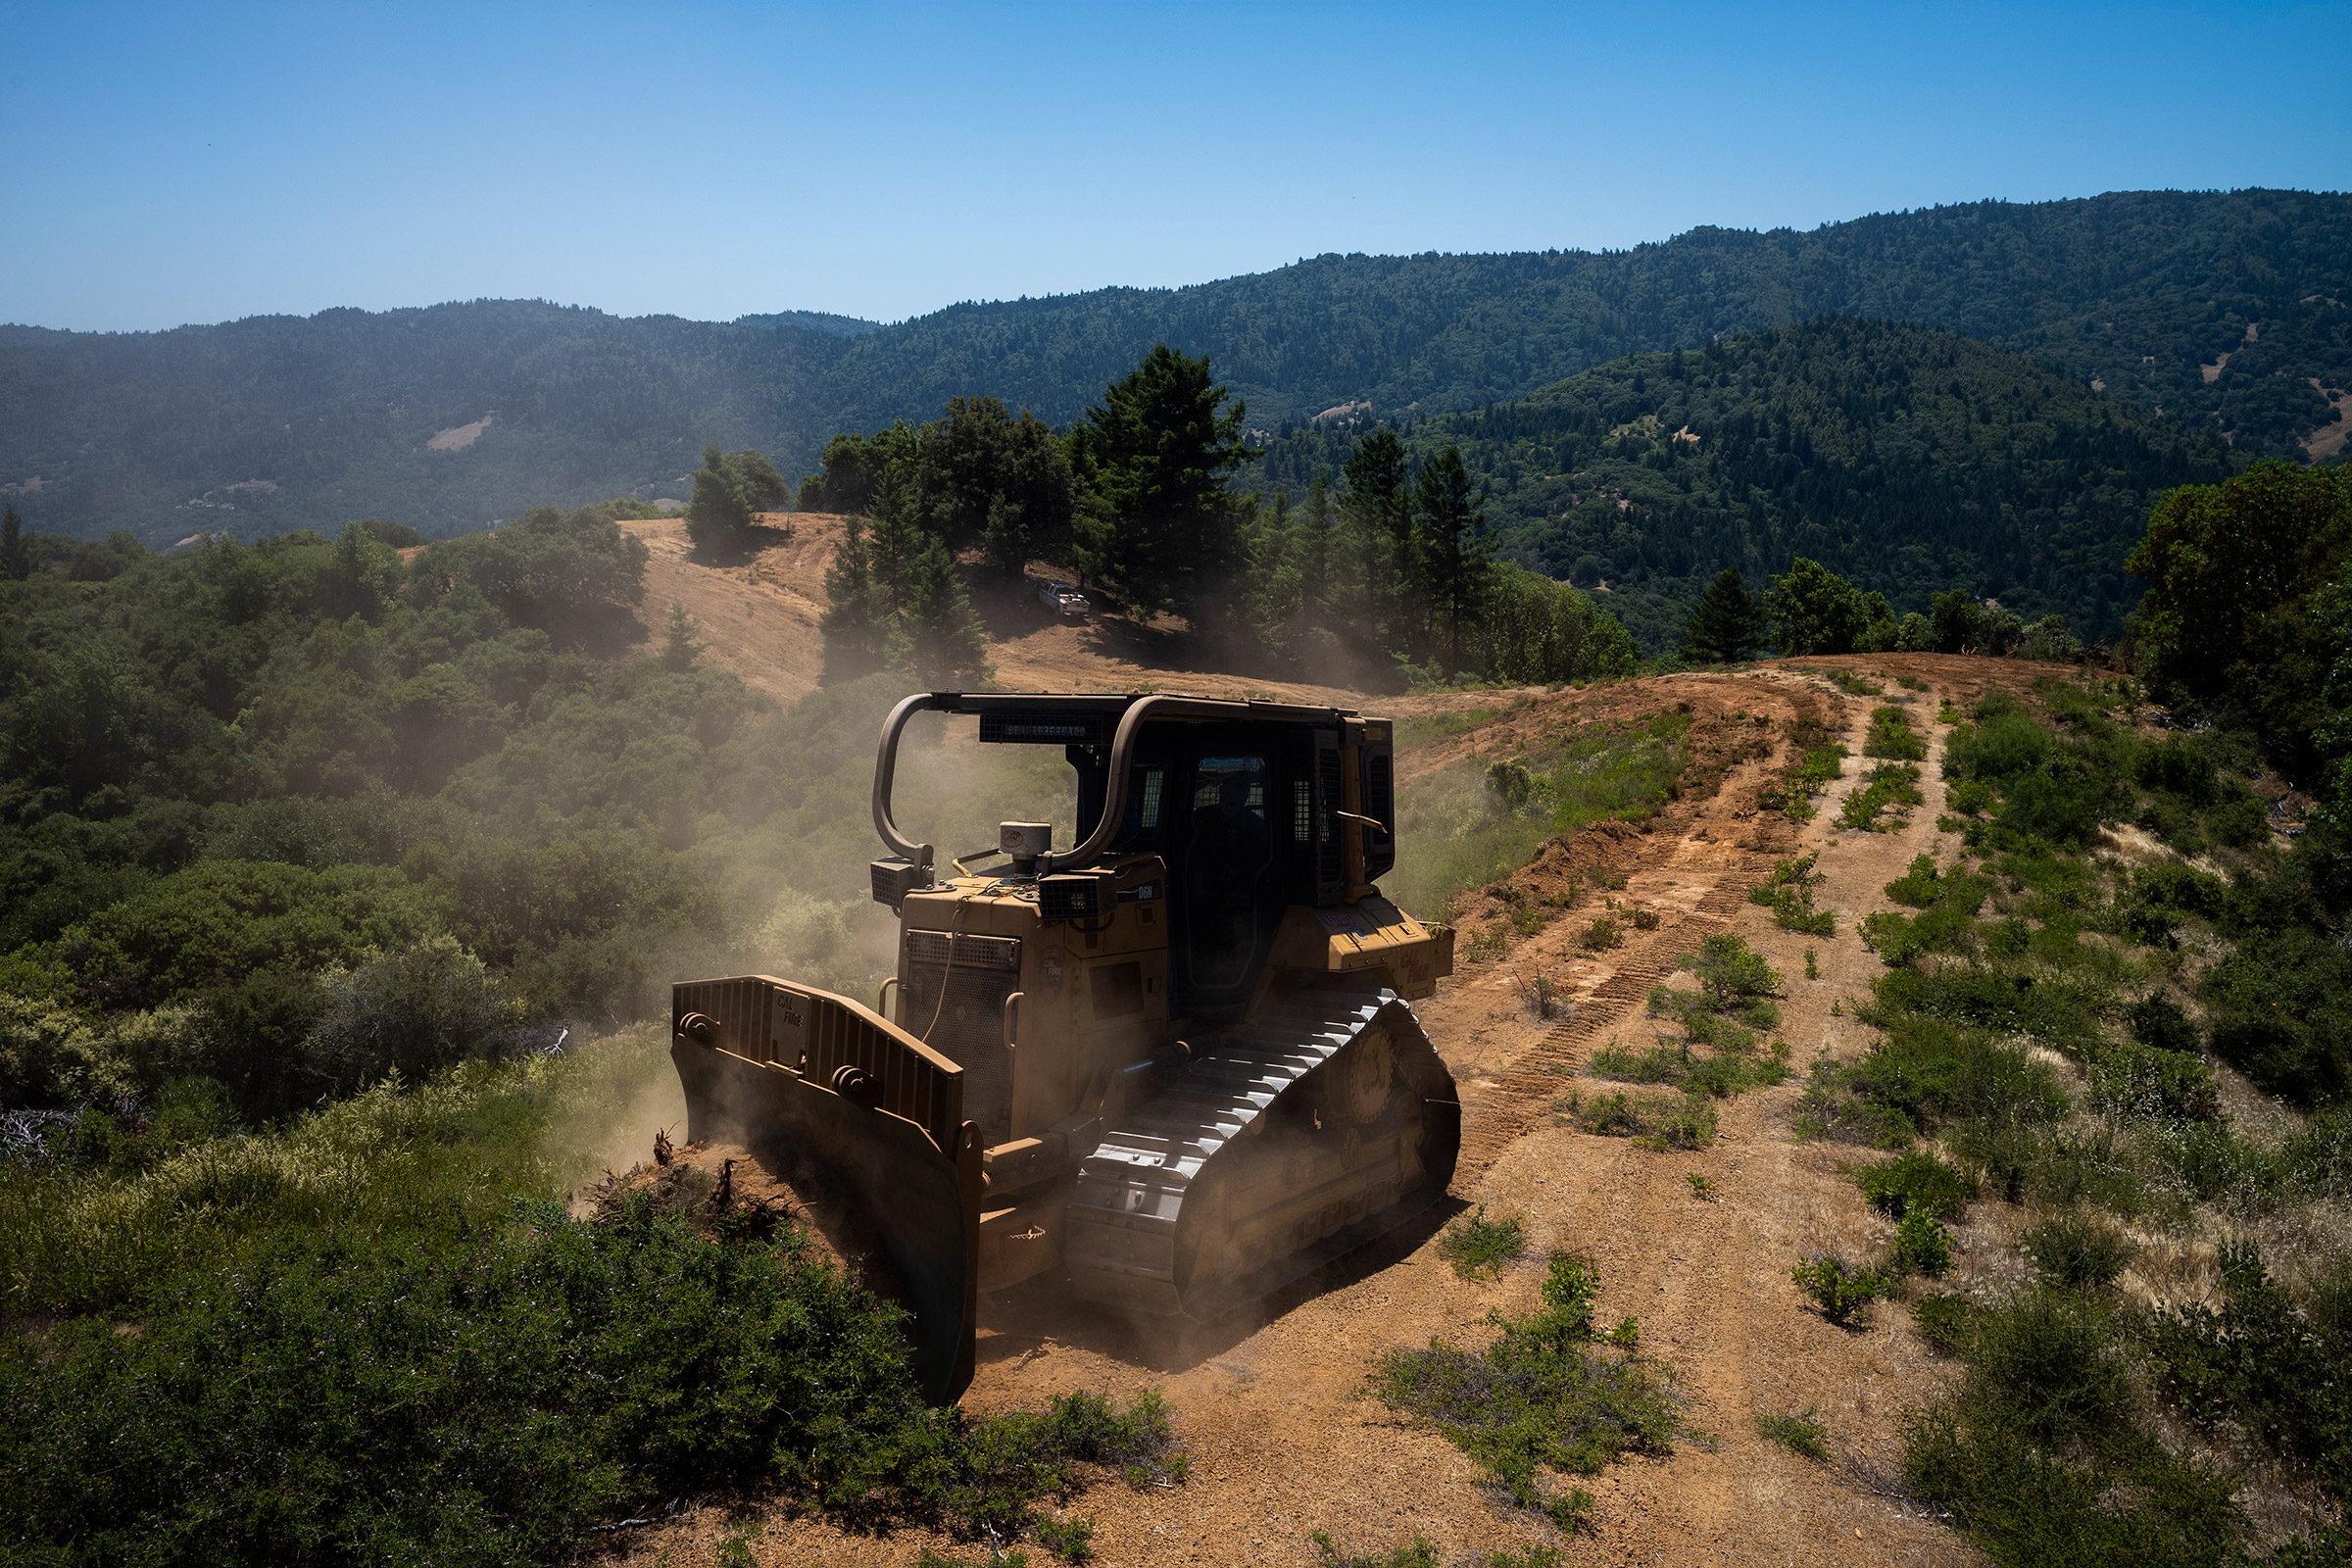 A bulldozer works on a firebreak, a gap in vegetation that acts as a barrier to slow the progress of a wildfire, in the hills surrounding Ukiah. (Brian L. Frank for TIME)